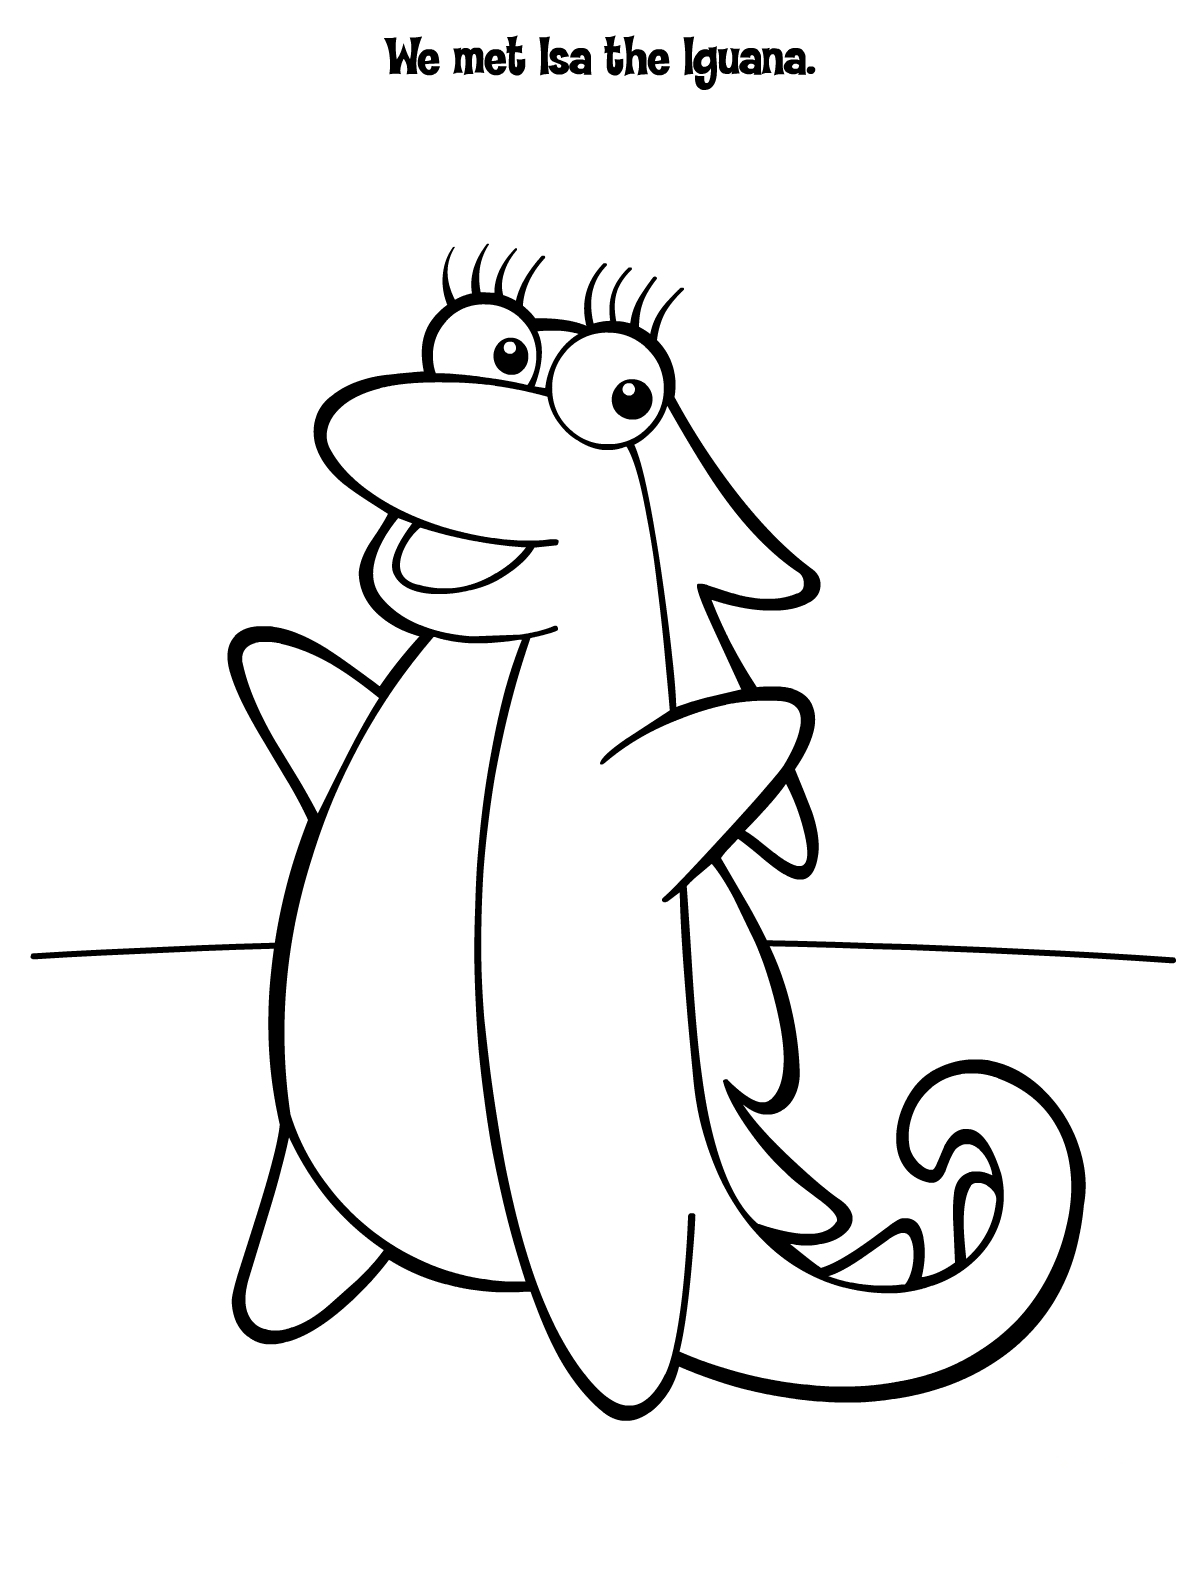 Iguana Coloring Page Isa The Iguana Dora The Explorer Coloring Page Coloring Store